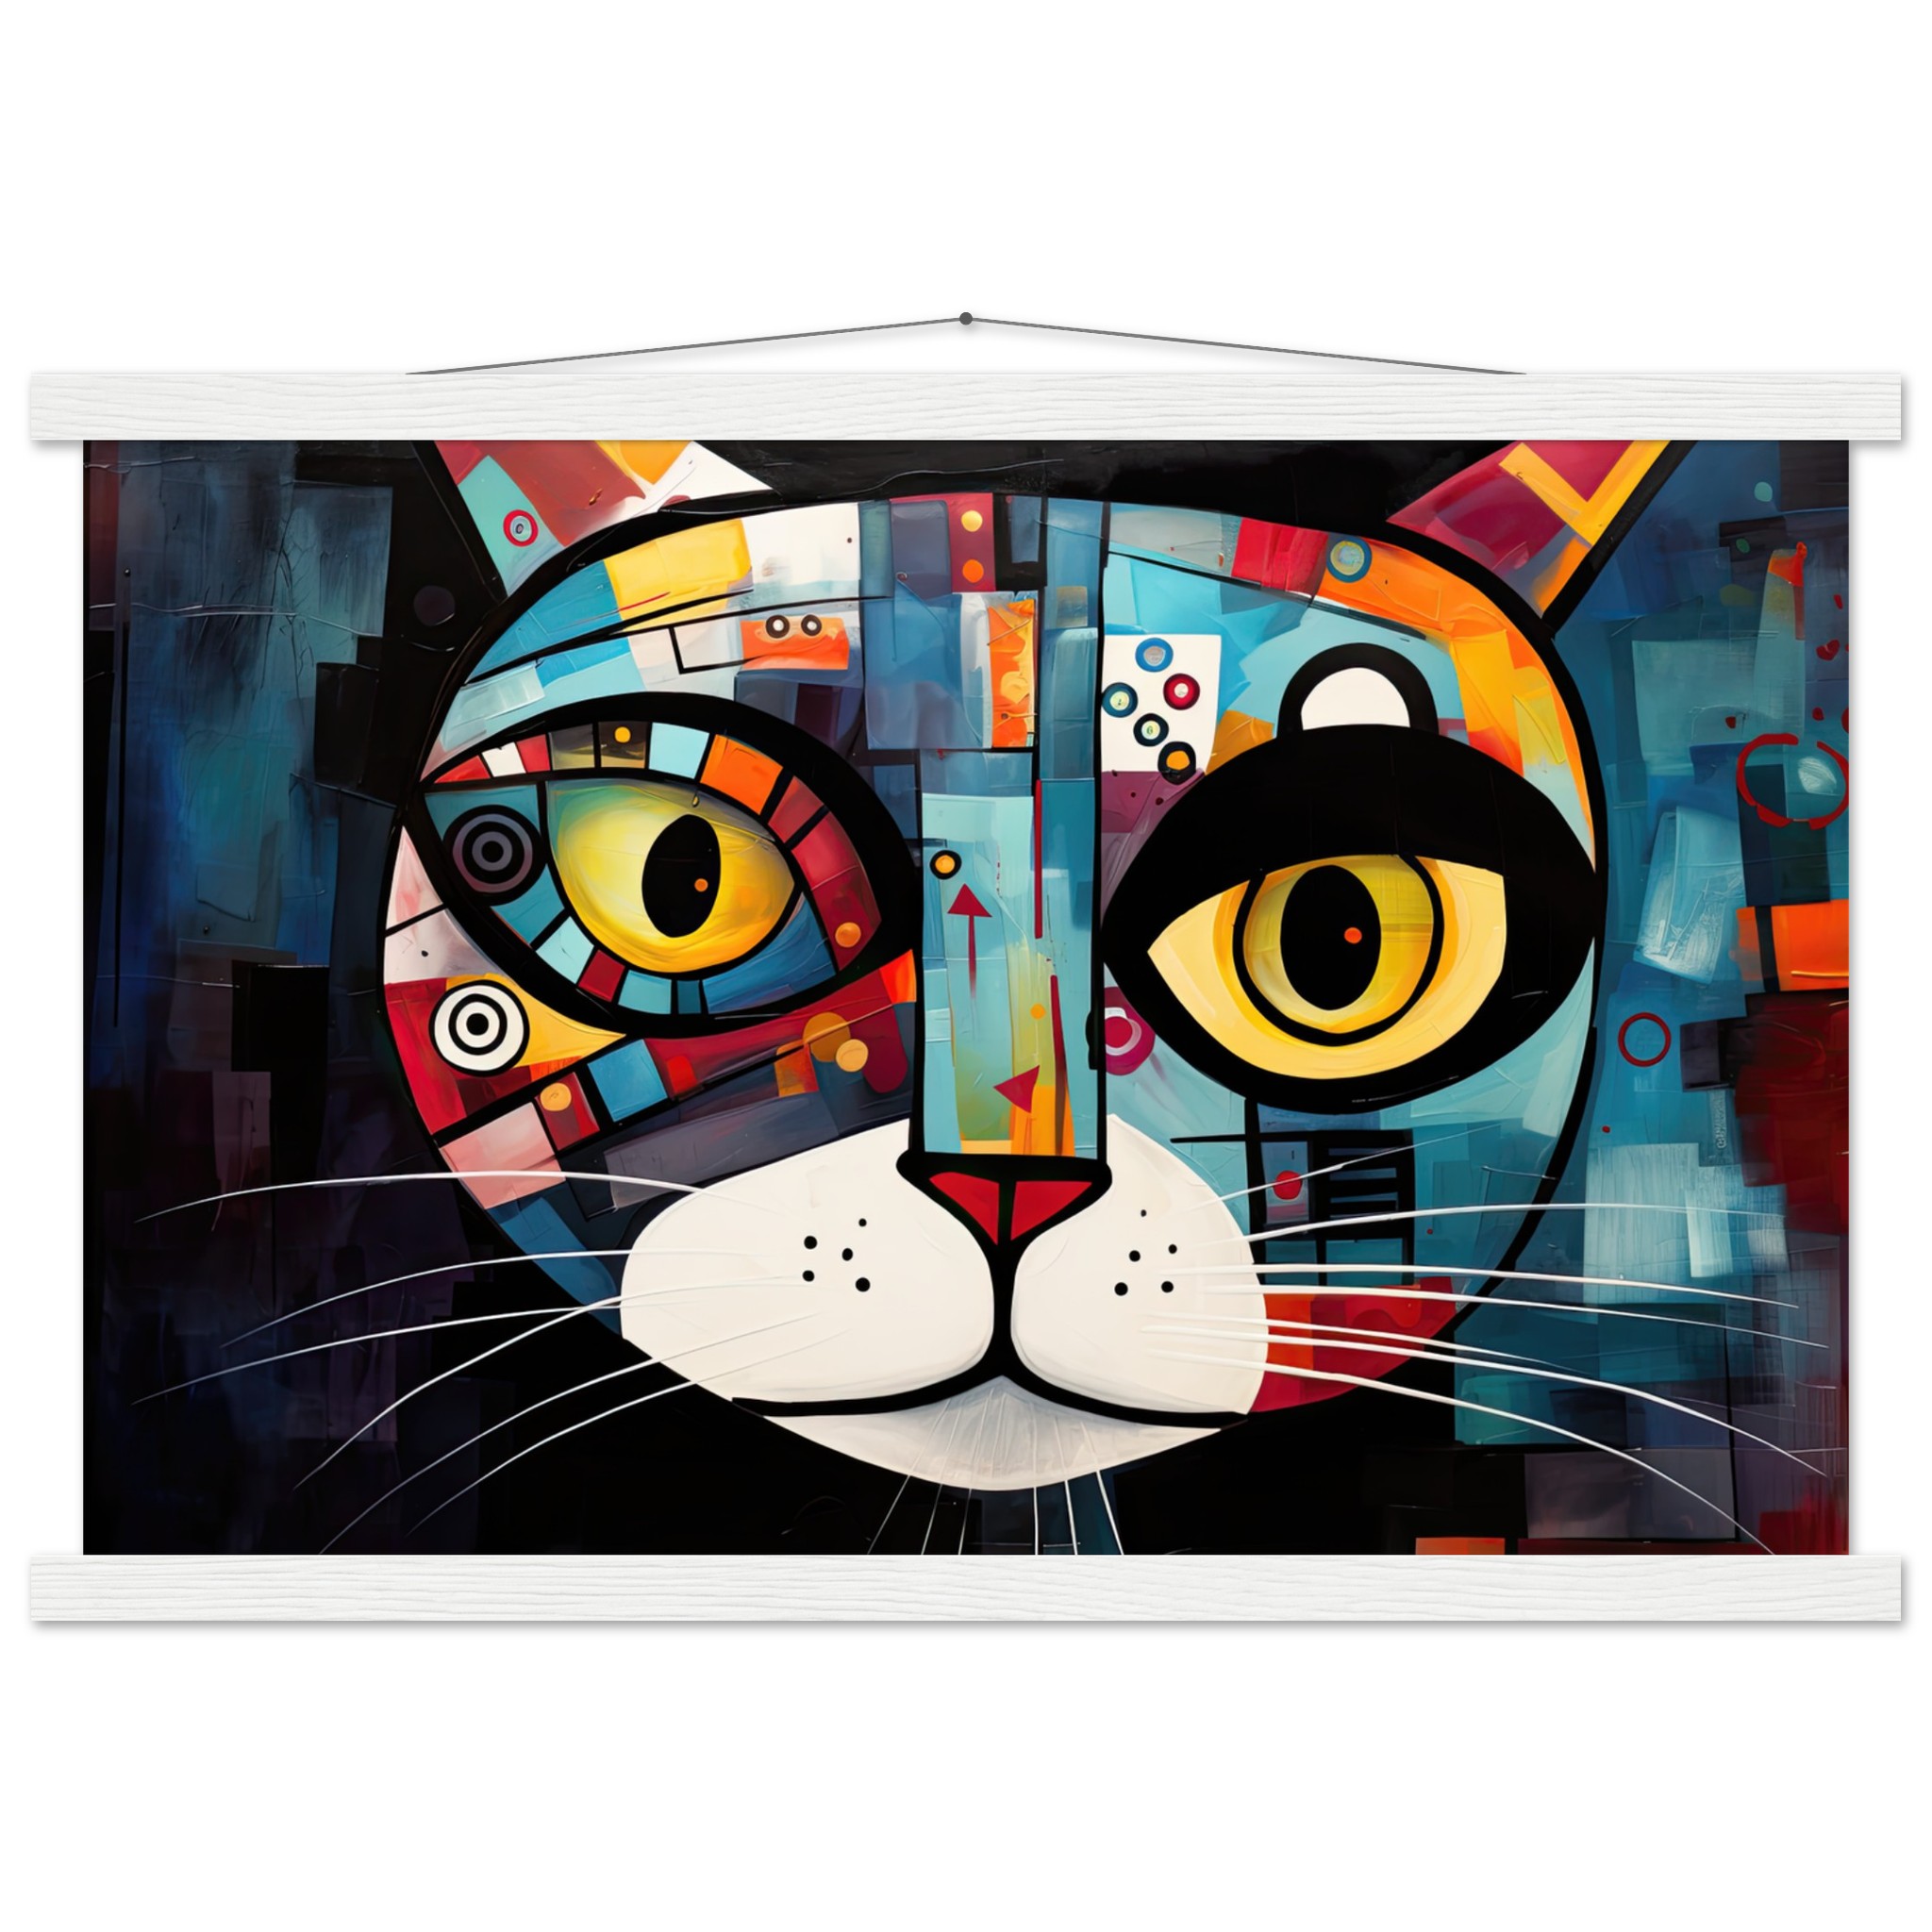 Abstract Painted Cat Face Hanging Print – 40×60 cm / 16×24″, White wall hanger